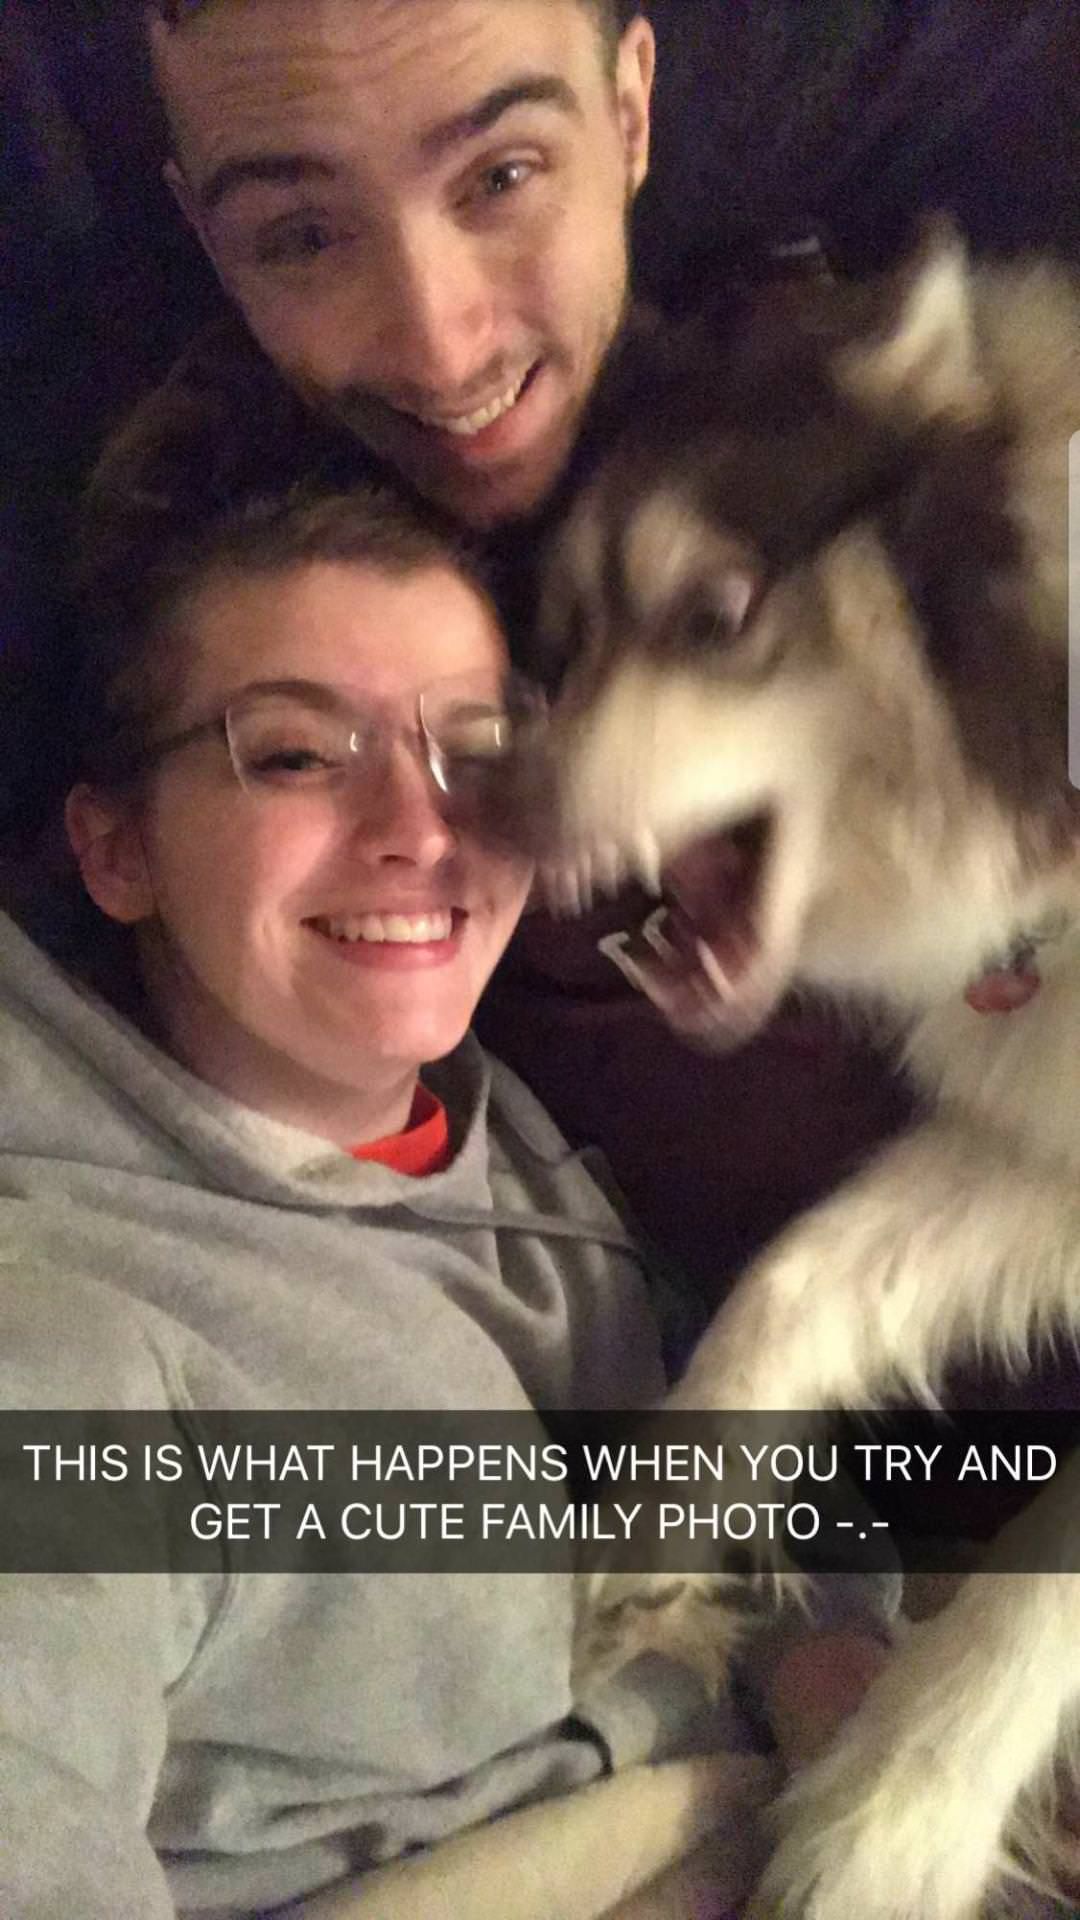 Wife decided to take family photo of us... dog decided nah